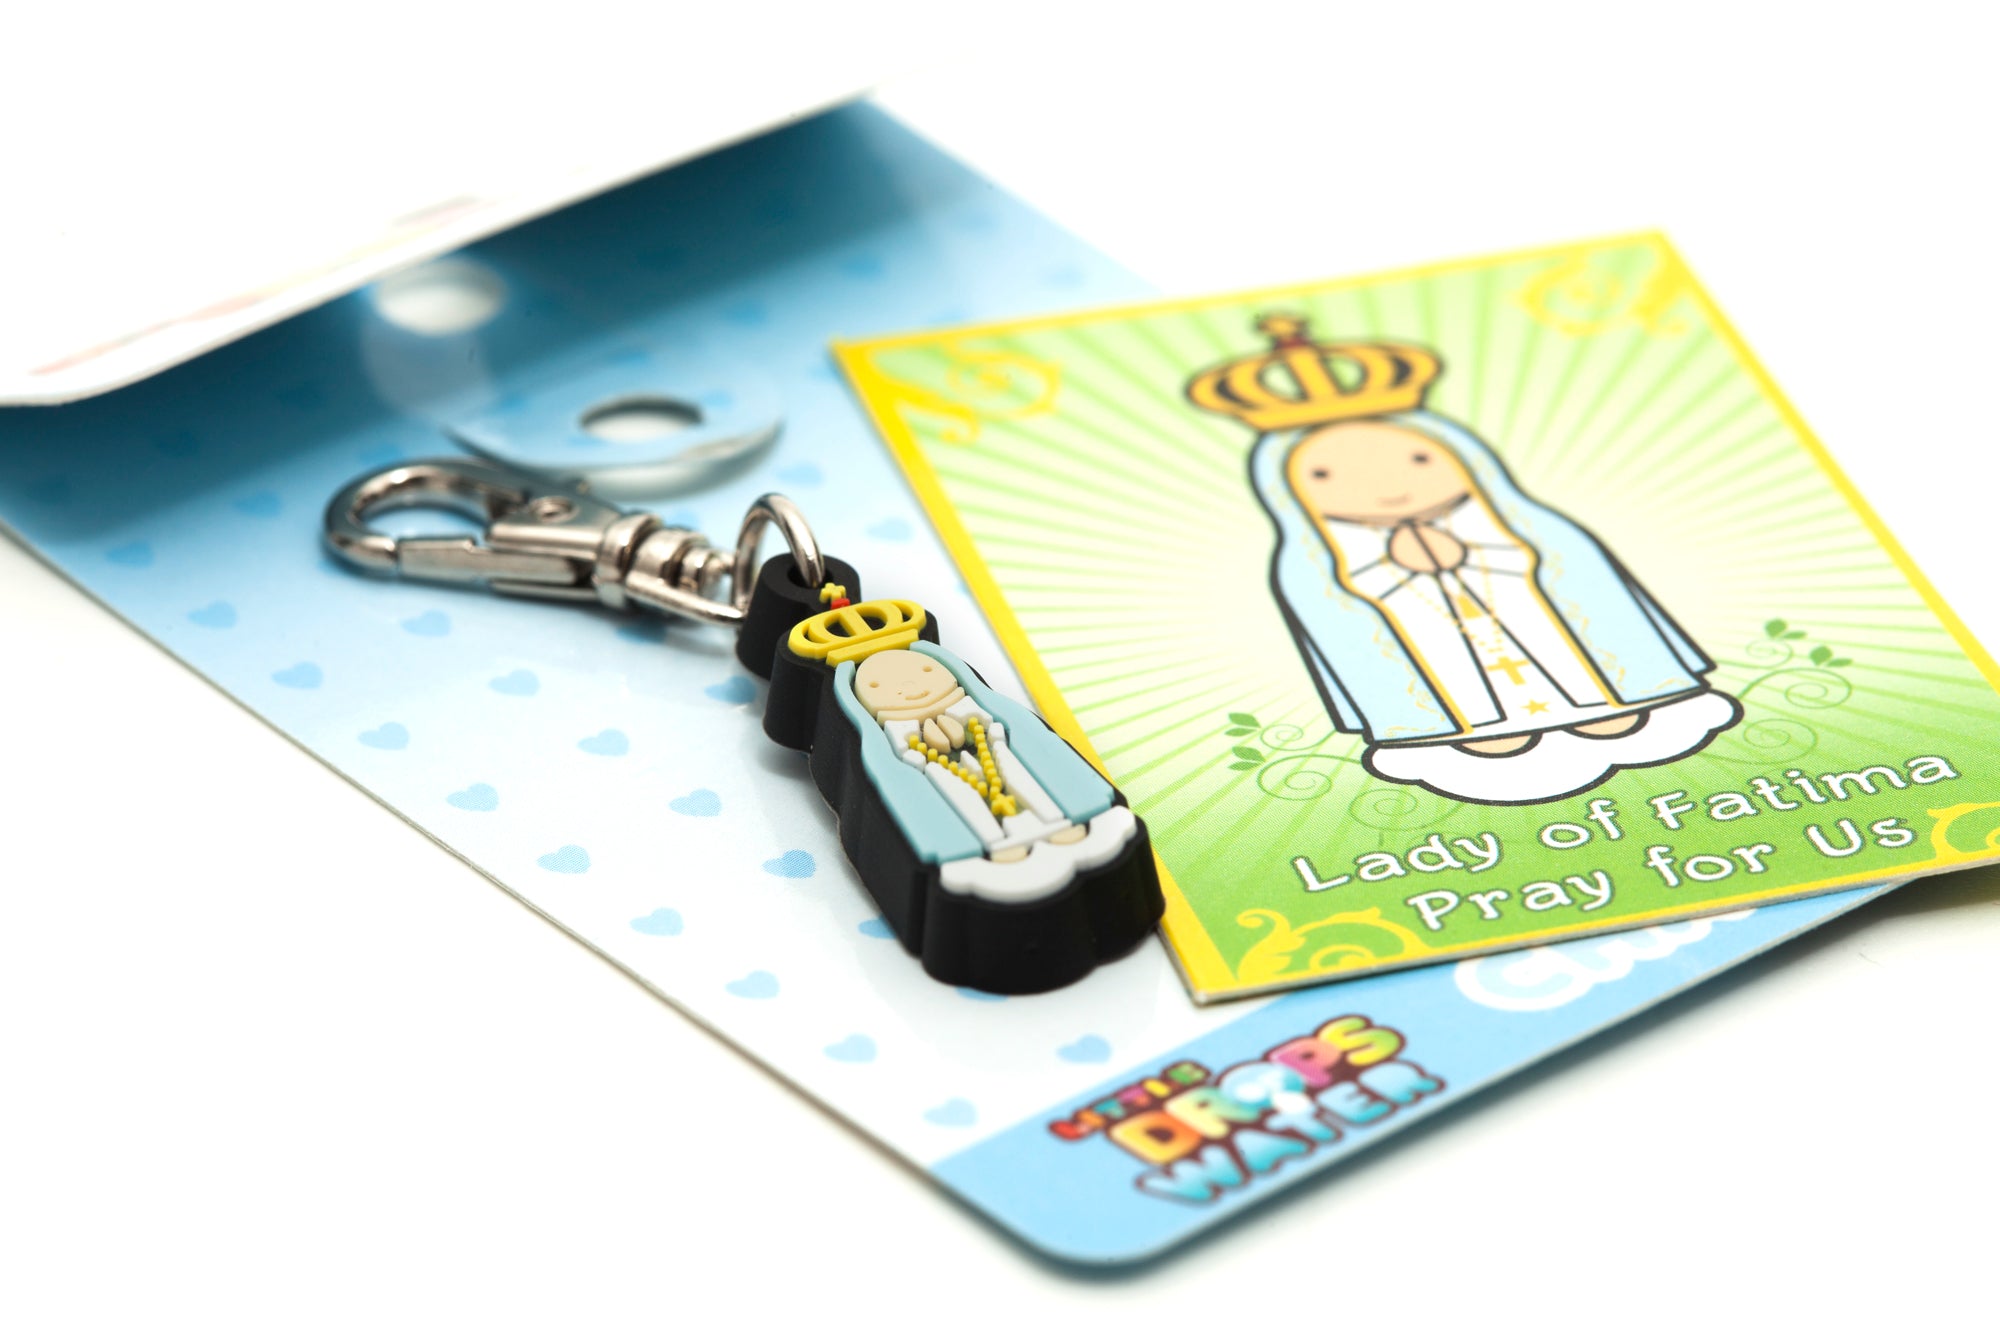 Our Lady of Fatima charm